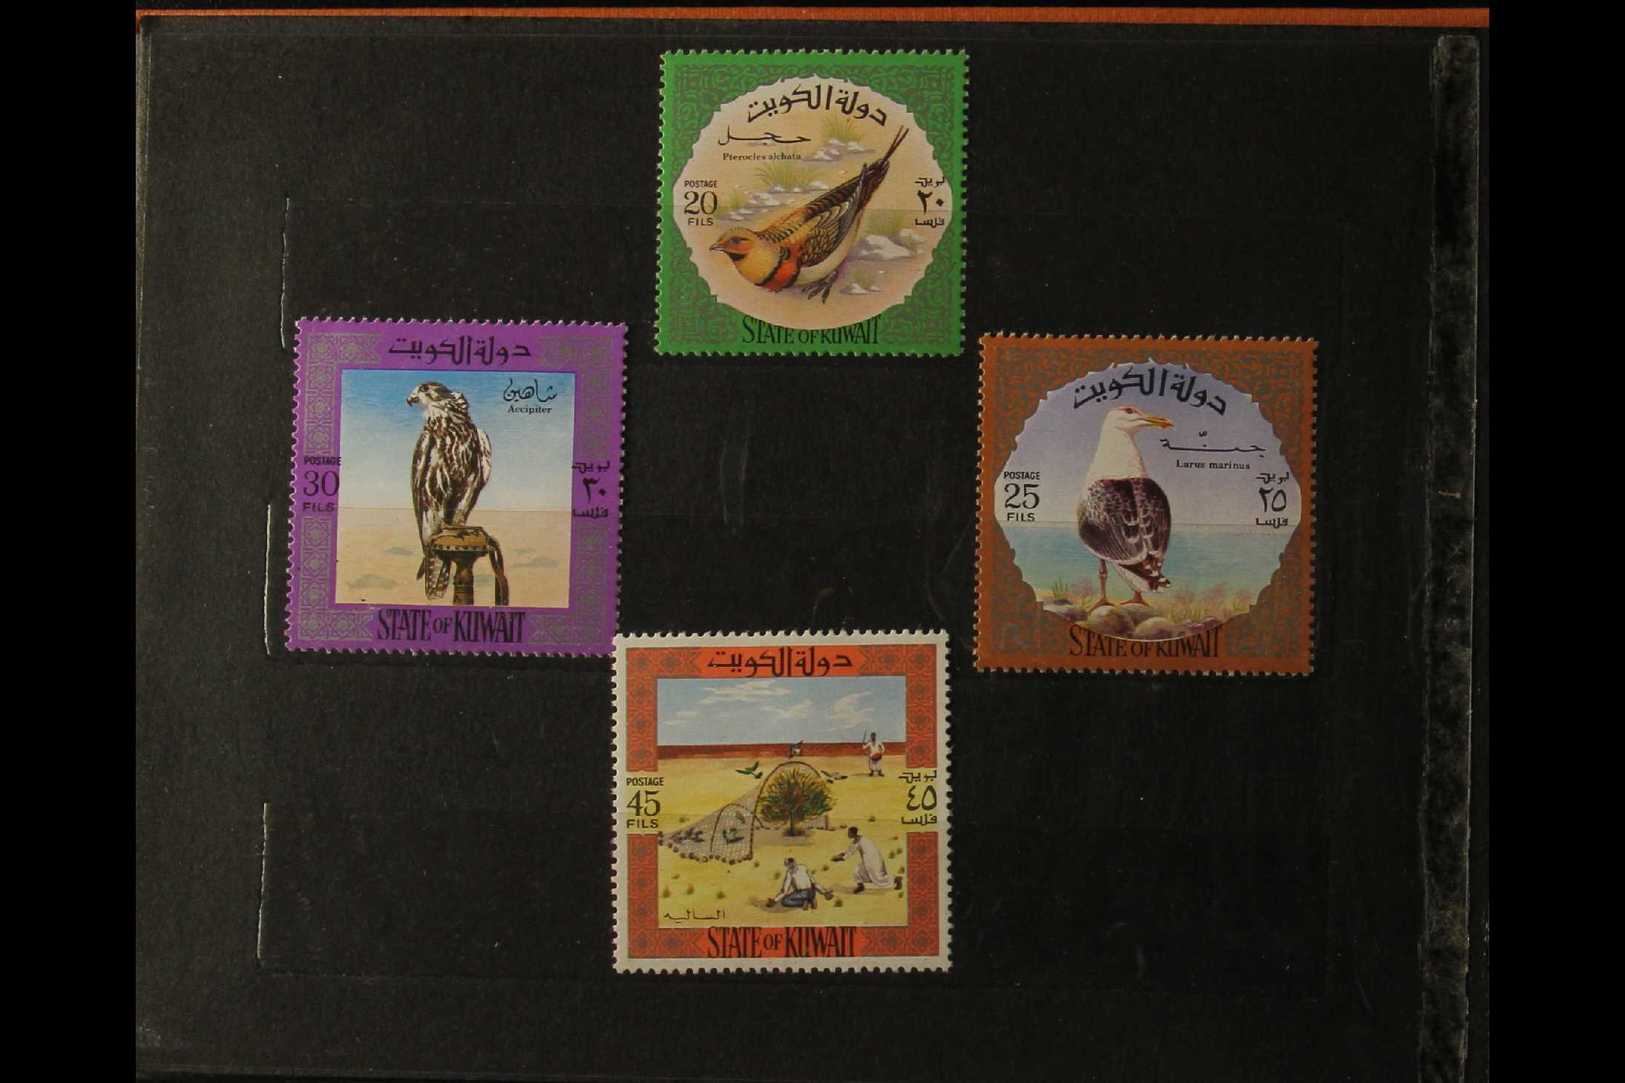 1975 PRESENTATION BOOKLET With Orange-brown Cover, Contains Small Range Of Sets From 1968 Holy Koran Set To 1974 Footbal - Kuwait